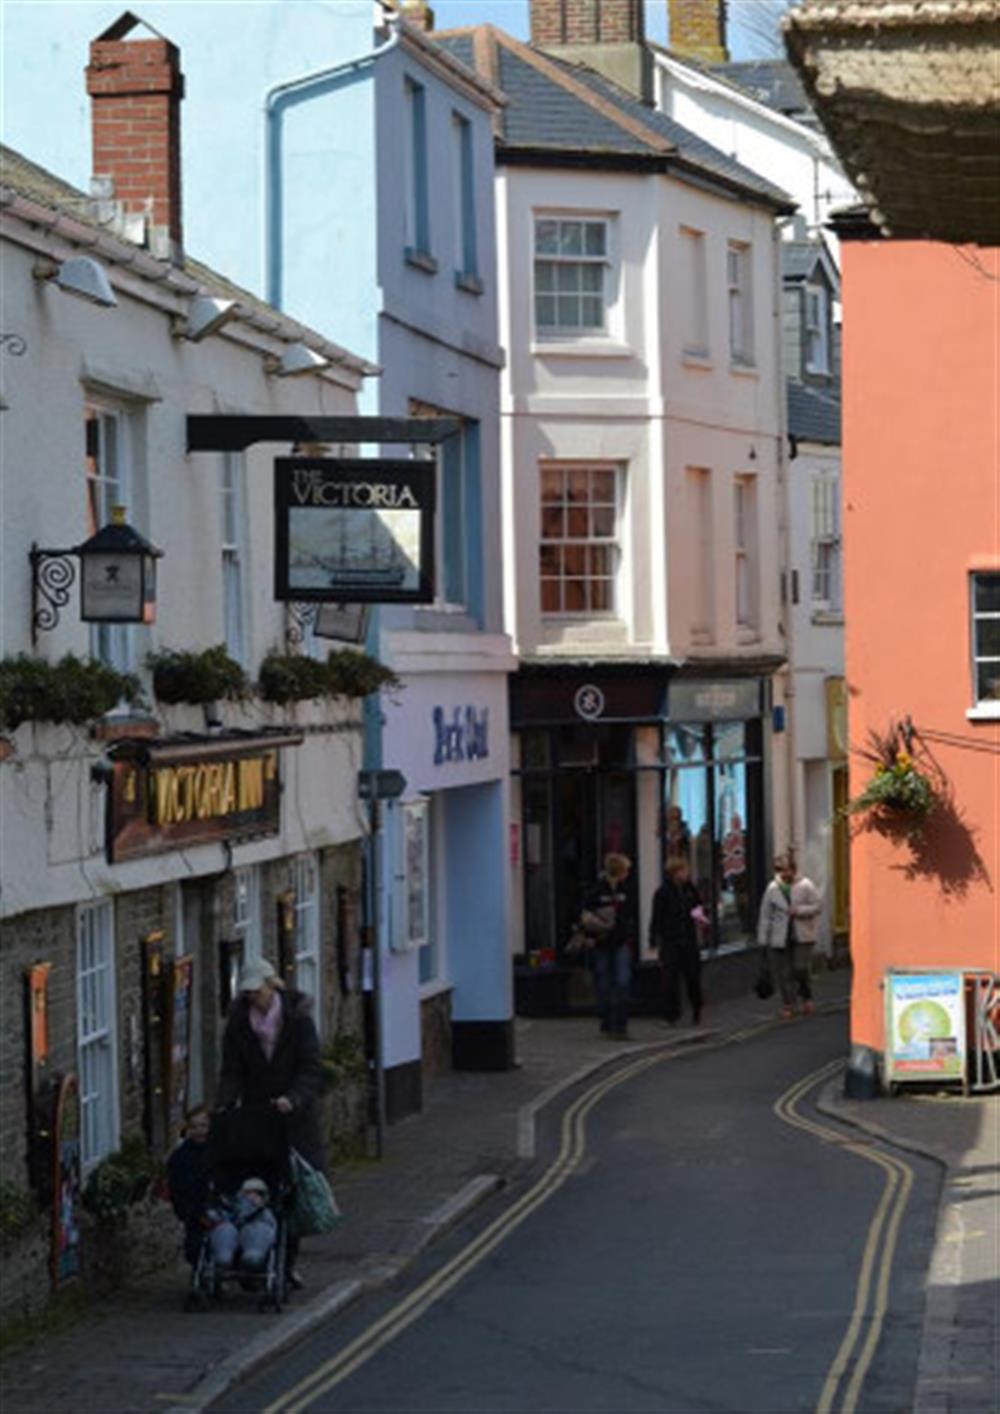 Fore Street in the centre of Salcombe is a 5 minute walk from the property